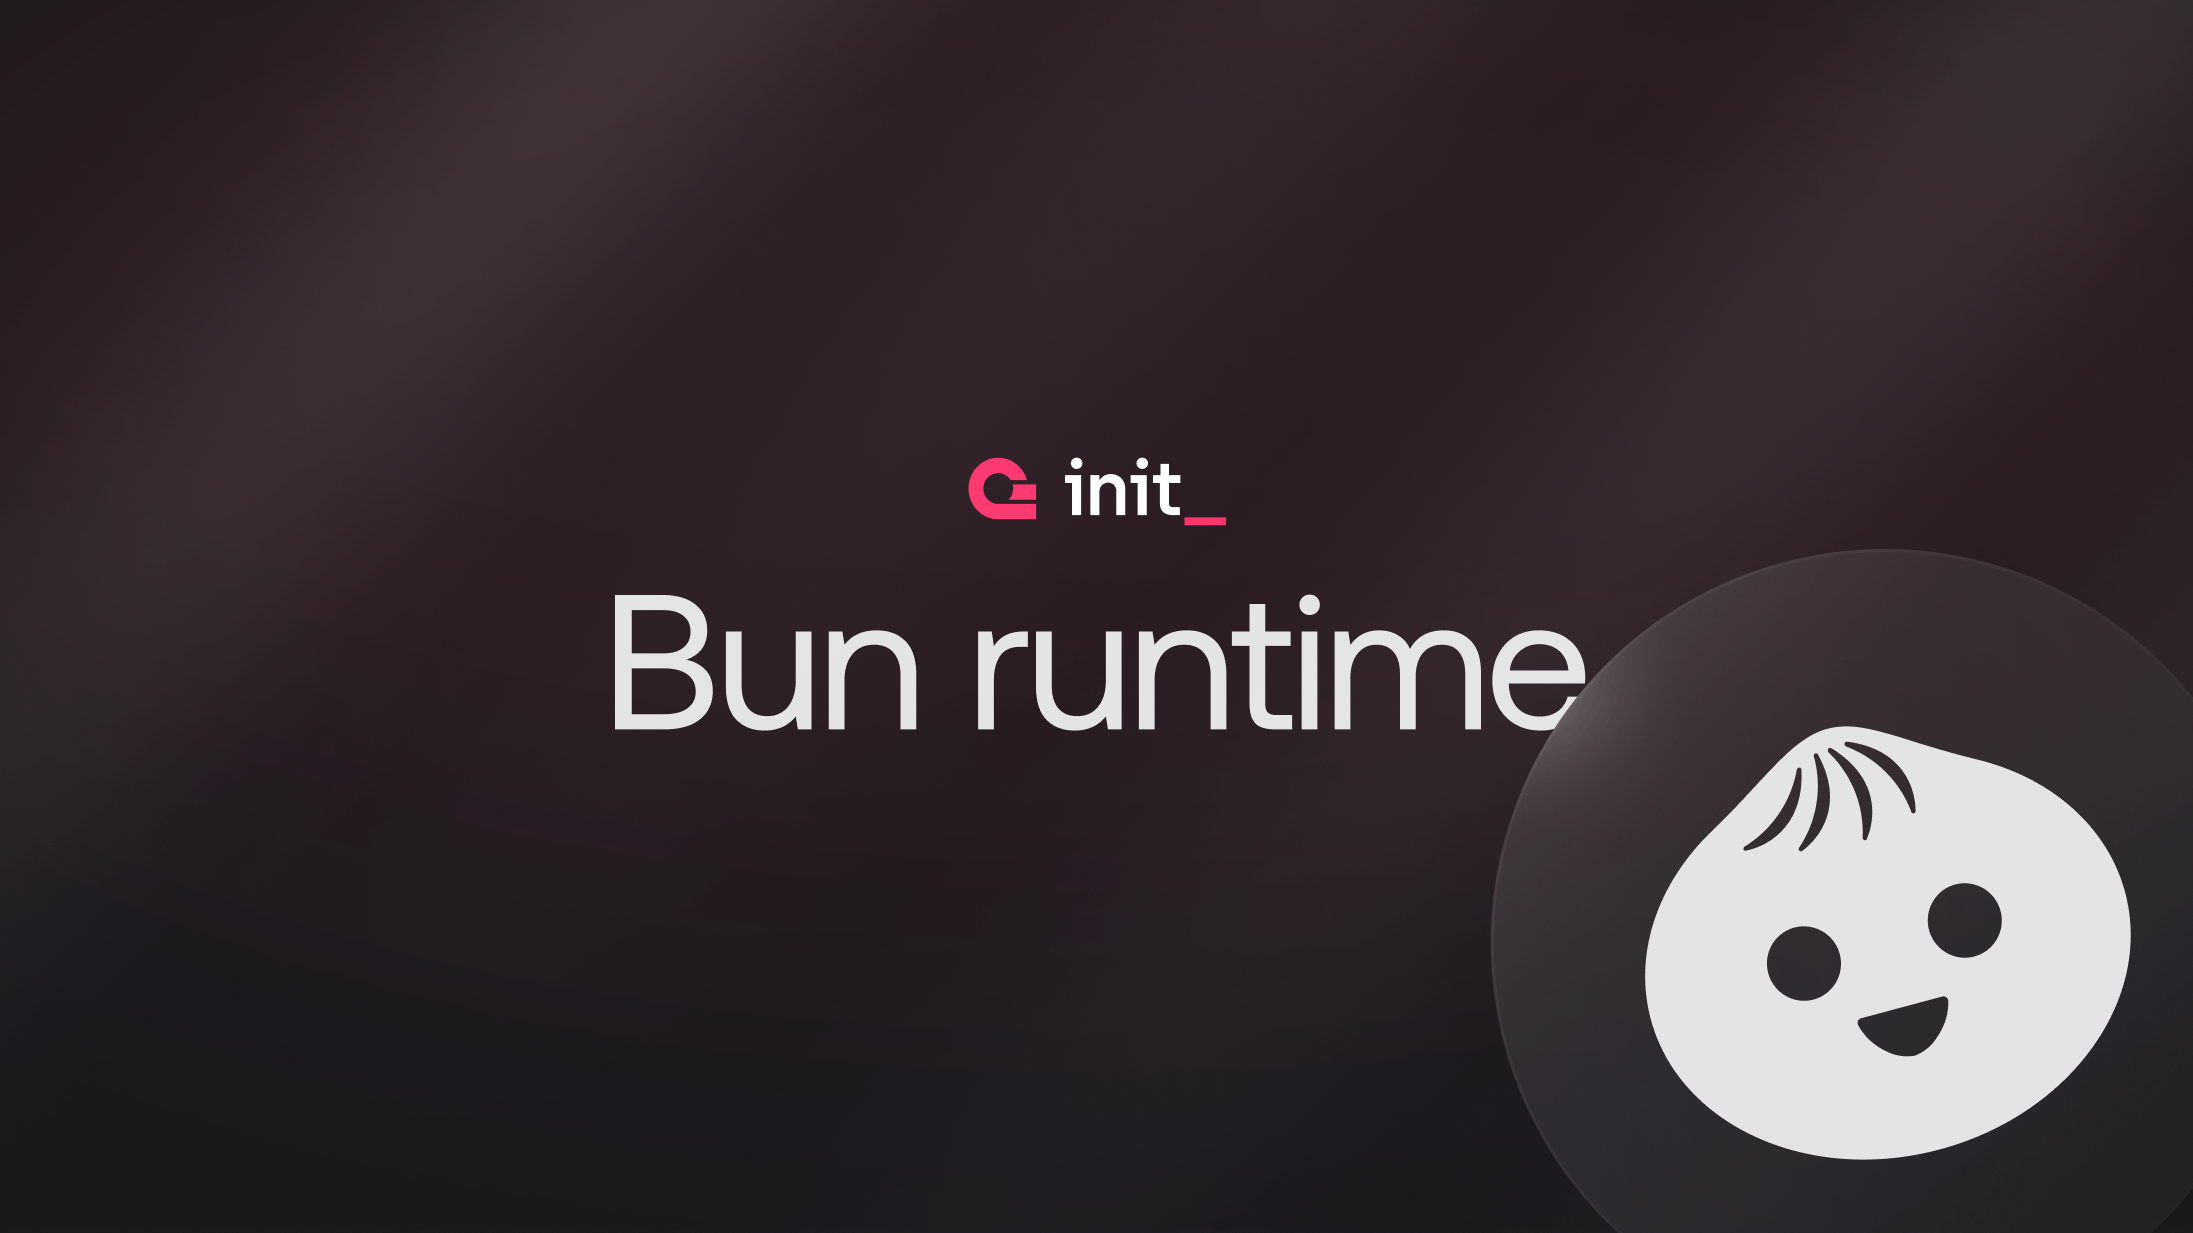 Why you need to try the new Bun function runtime